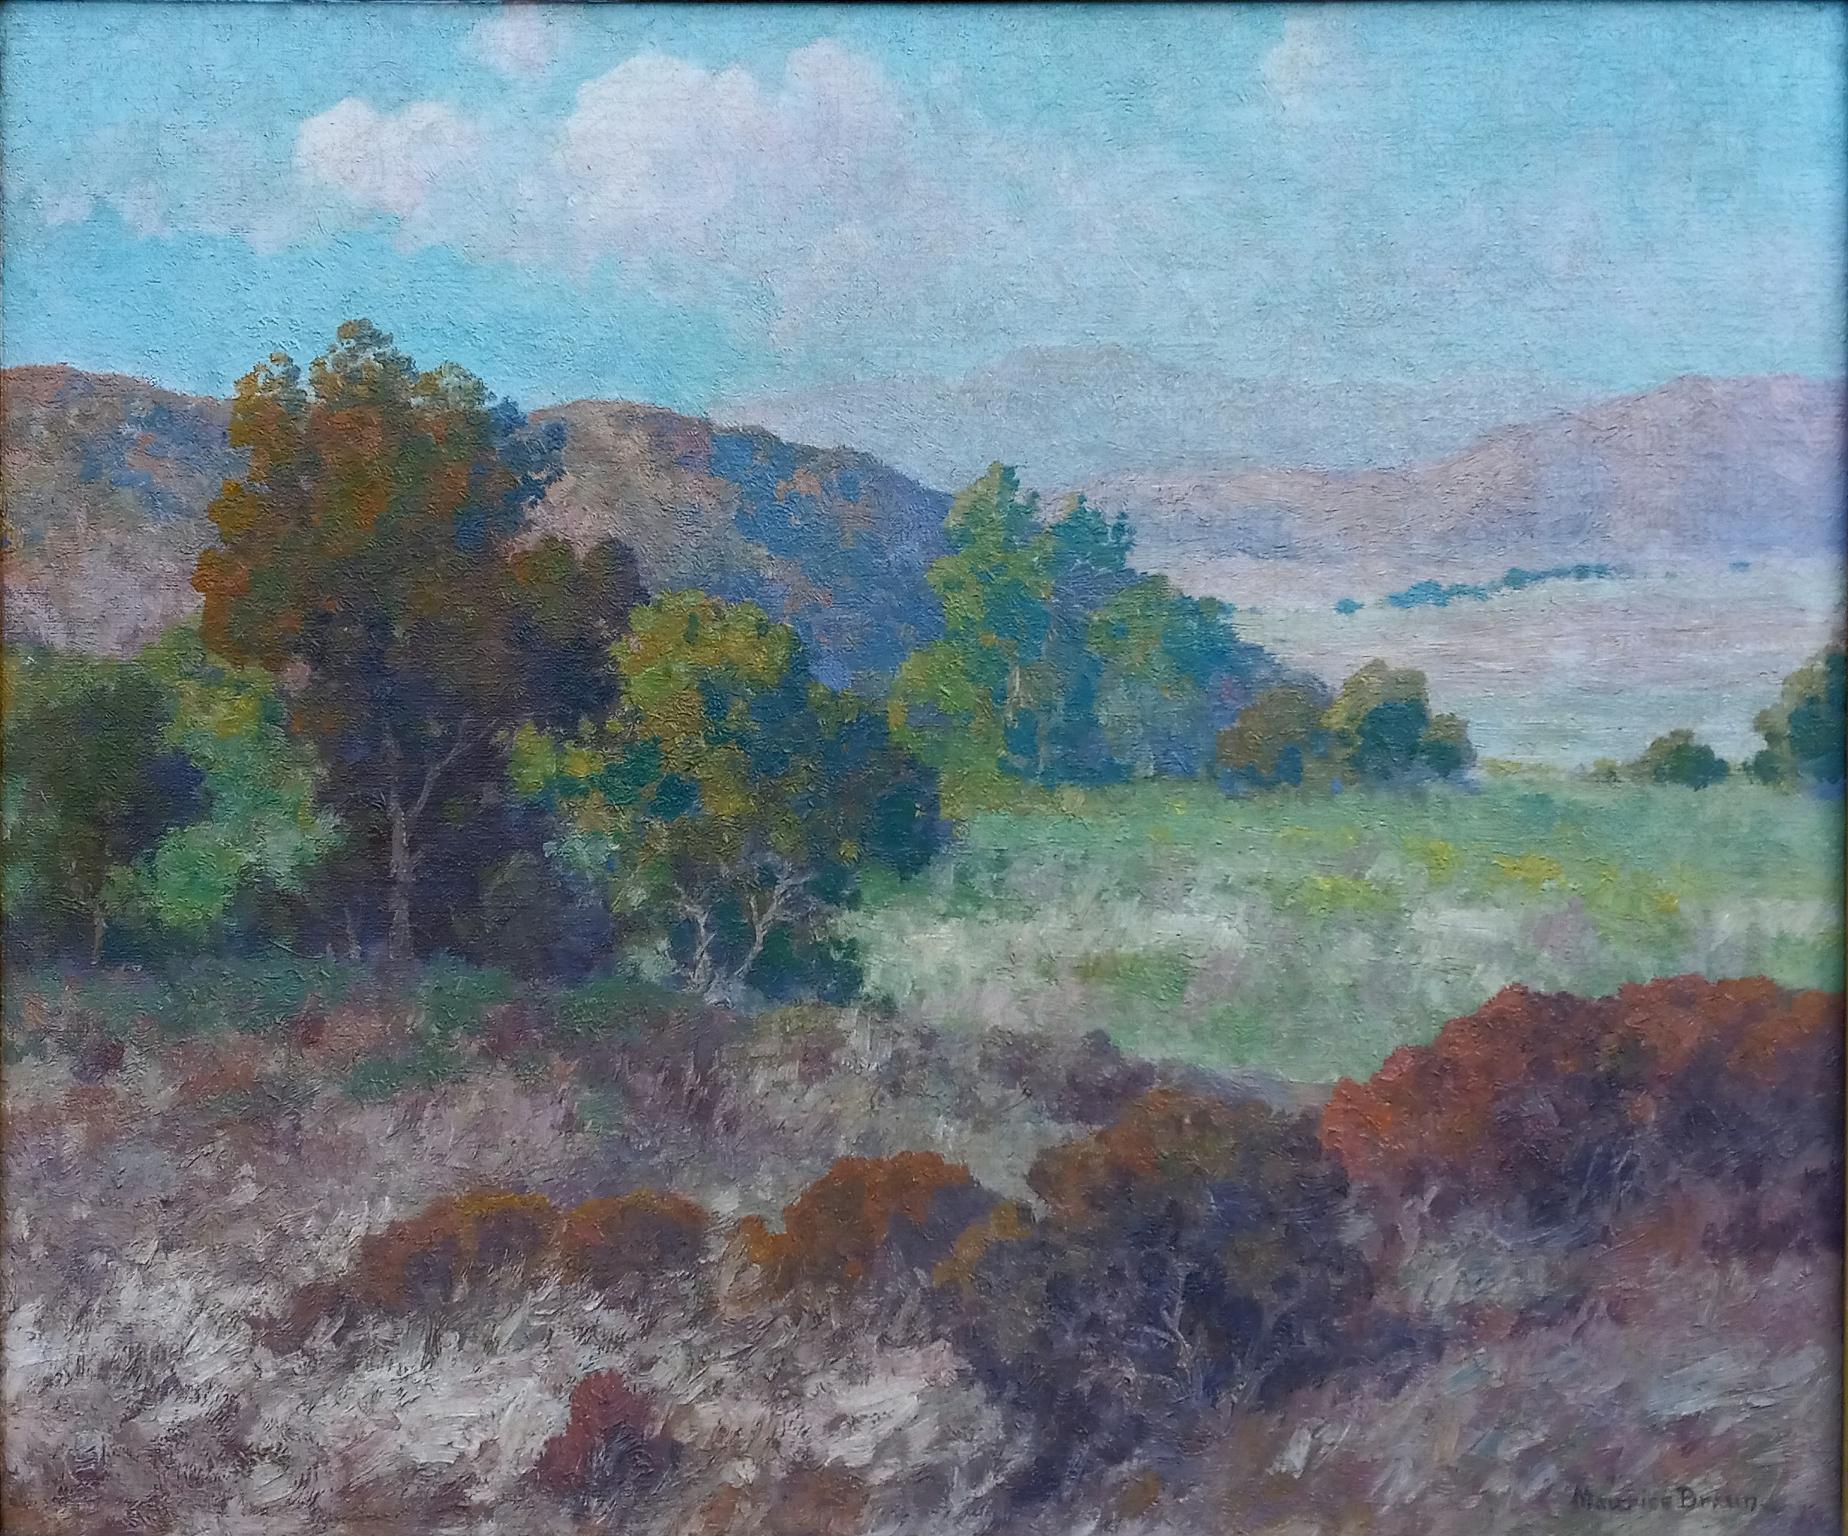 

Beautiful oil on canvas by noted San Diego artist Maurice Braun (1877-1941).
The painting measures 20